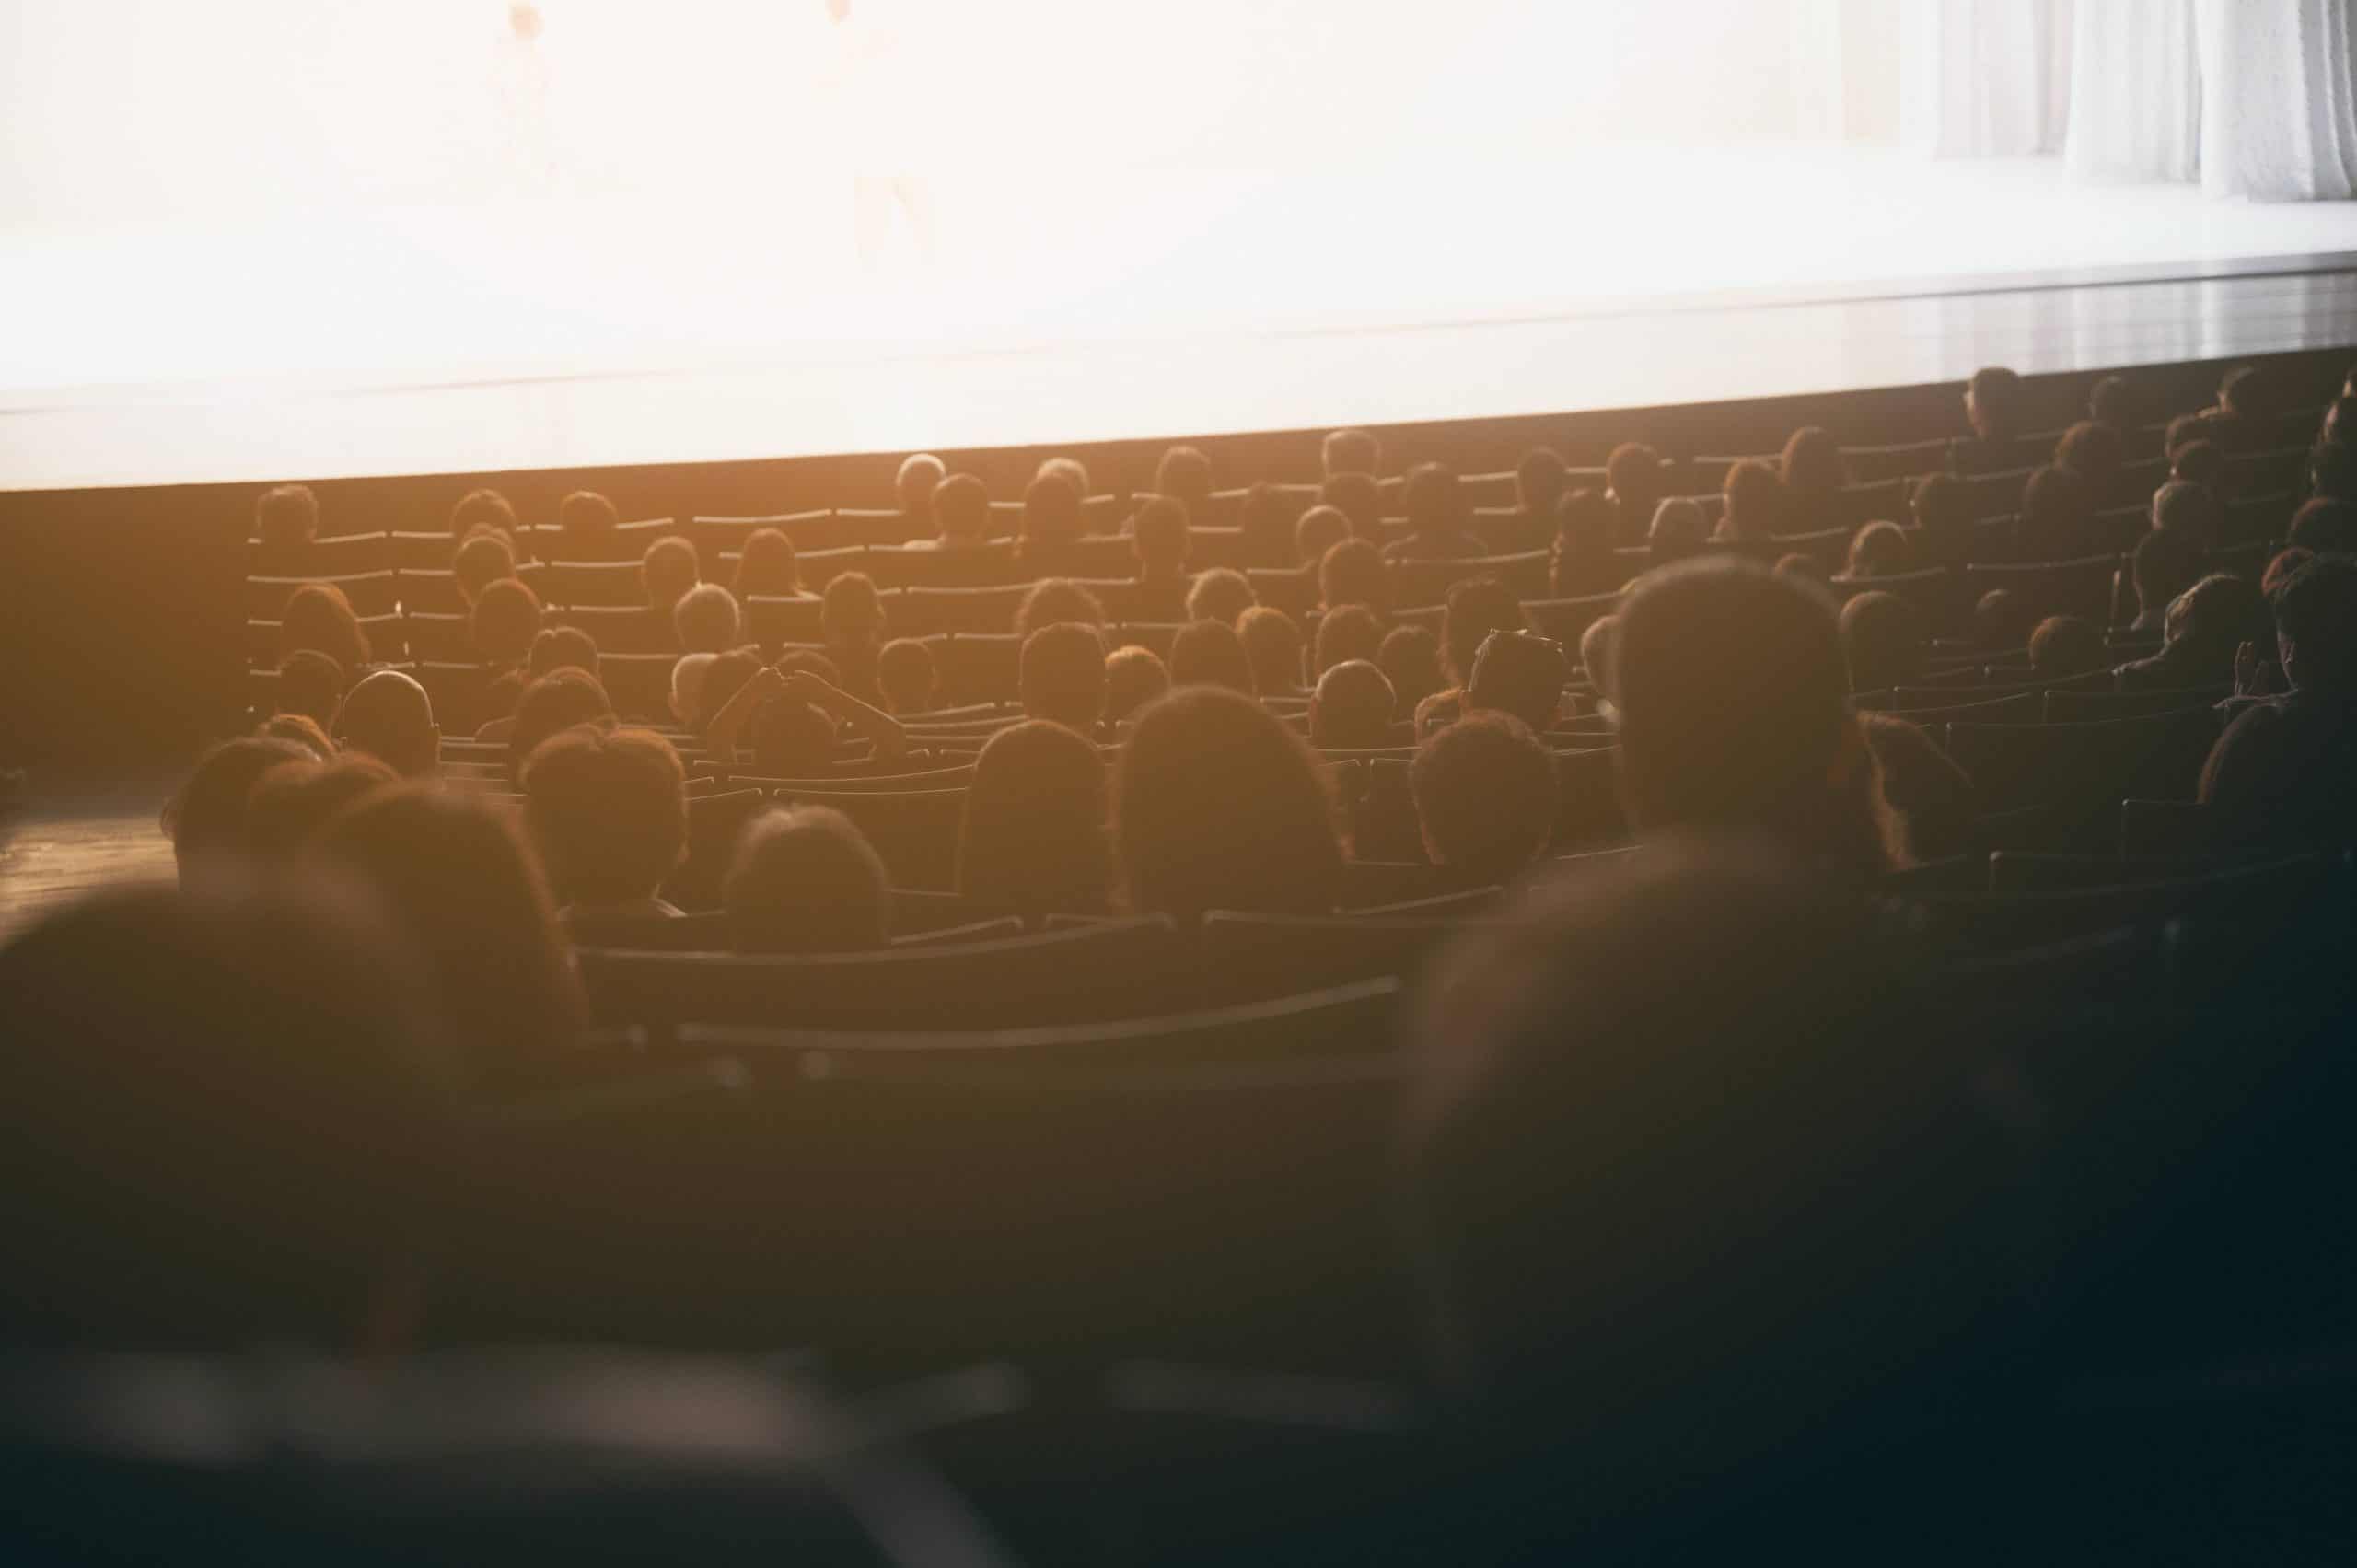 Tips for submitting your indie film to festivals